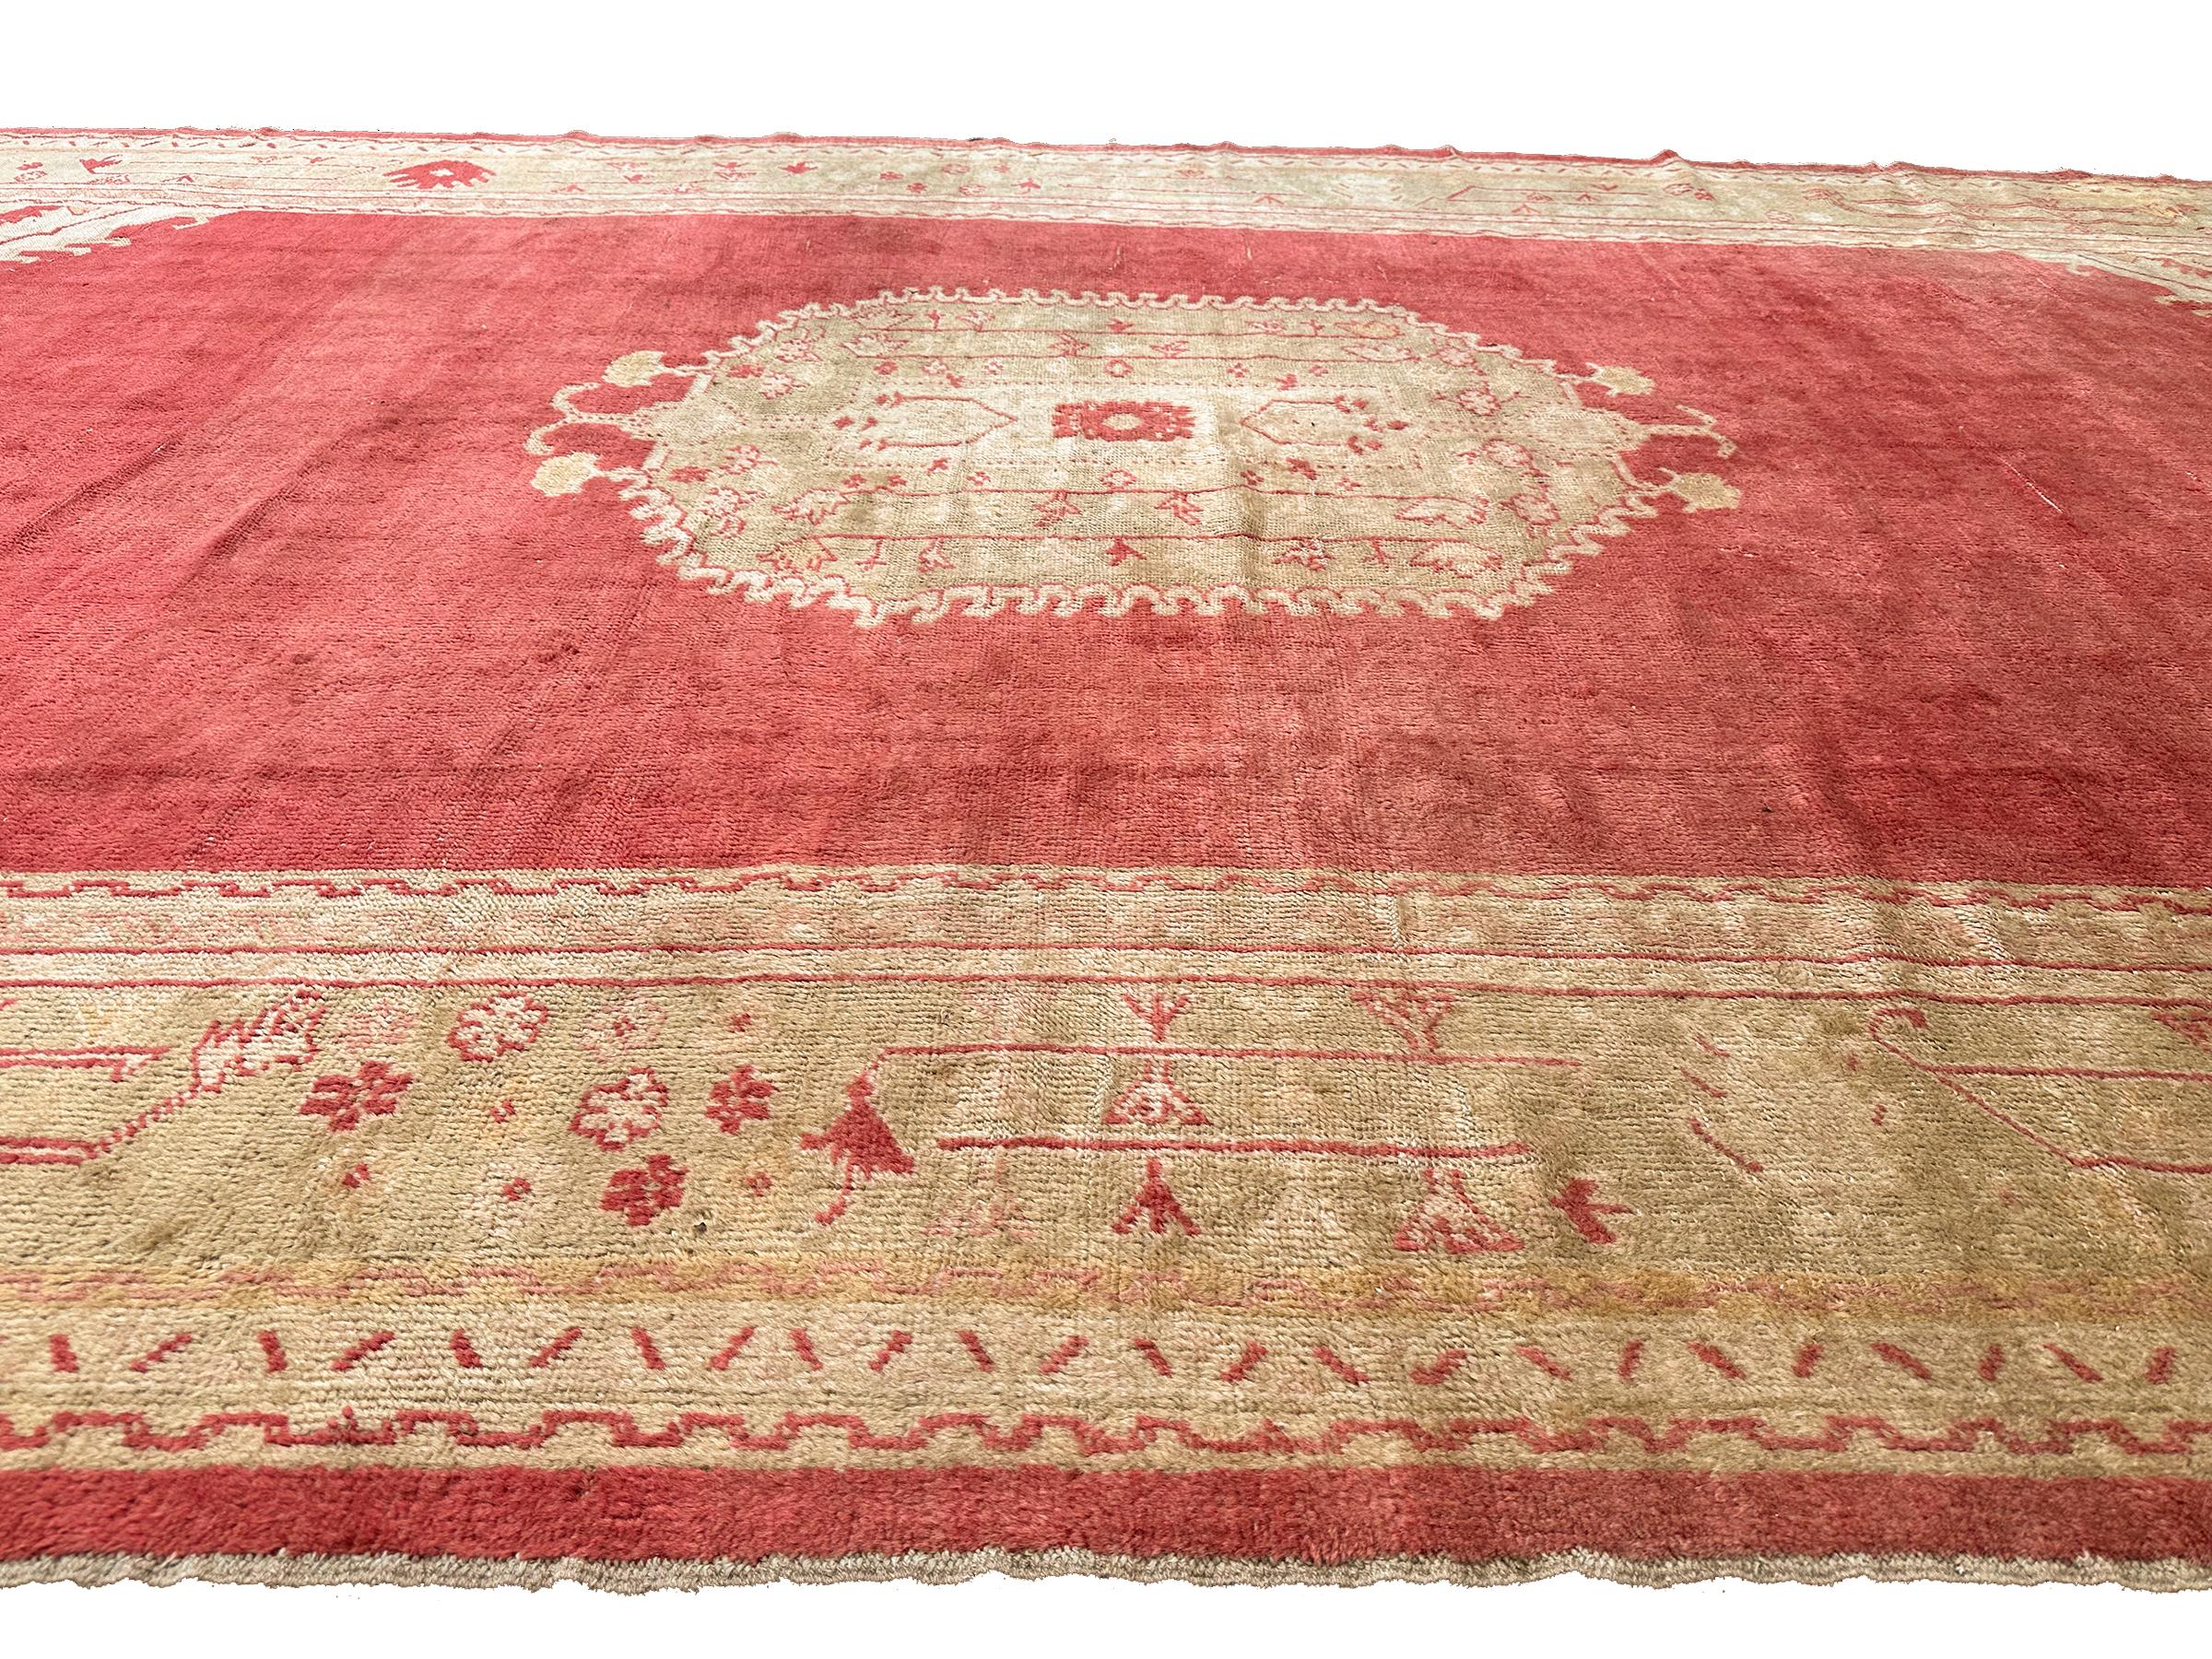 Authentic Antique Oushak Oversized Wool Foundation 1900 10x18 Handmade 305x549cm For Sale 4